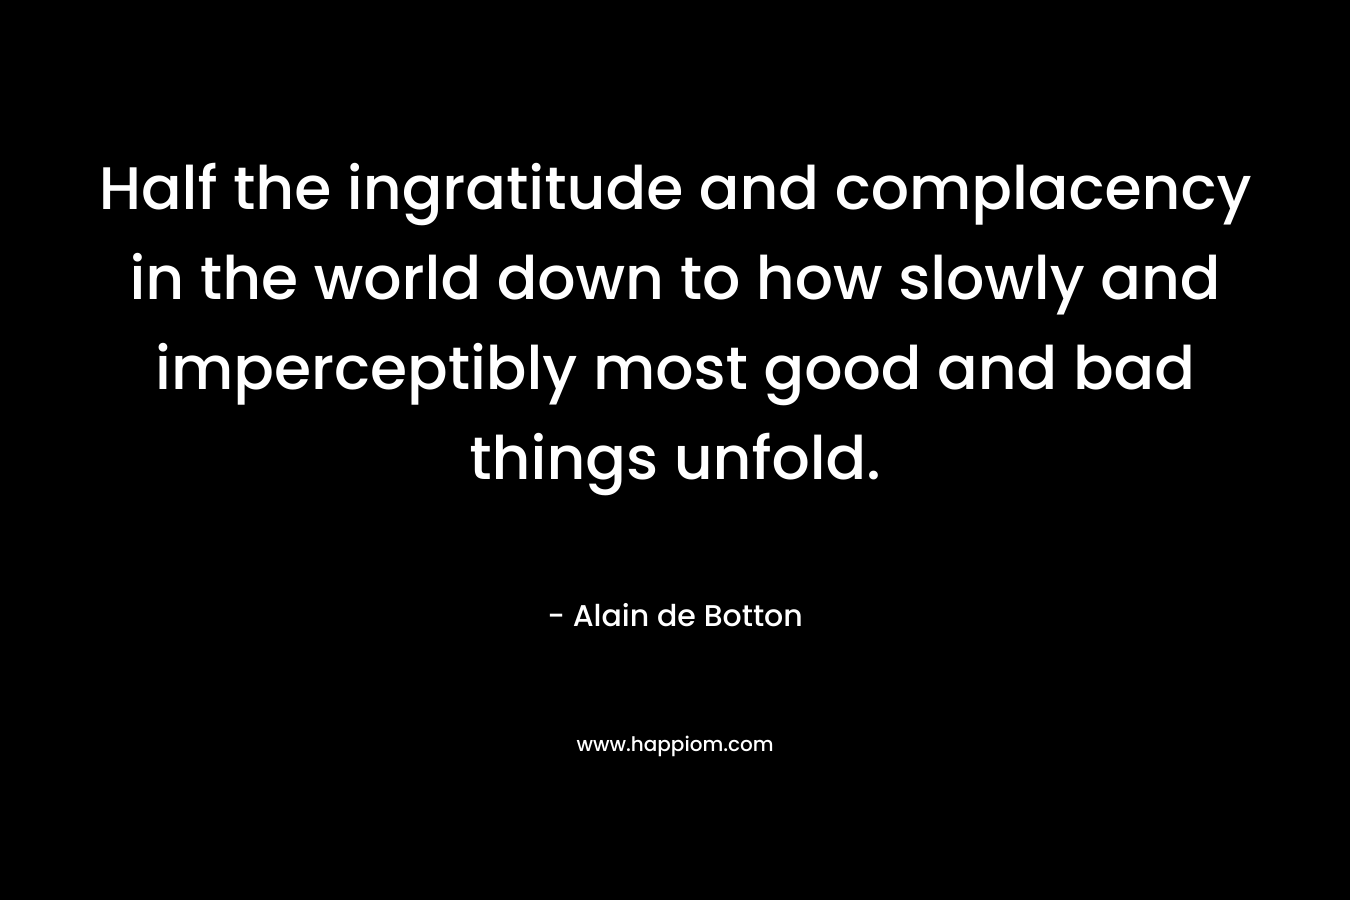 Half the ingratitude and complacency in the world down to how slowly and imperceptibly most good and bad things unfold.